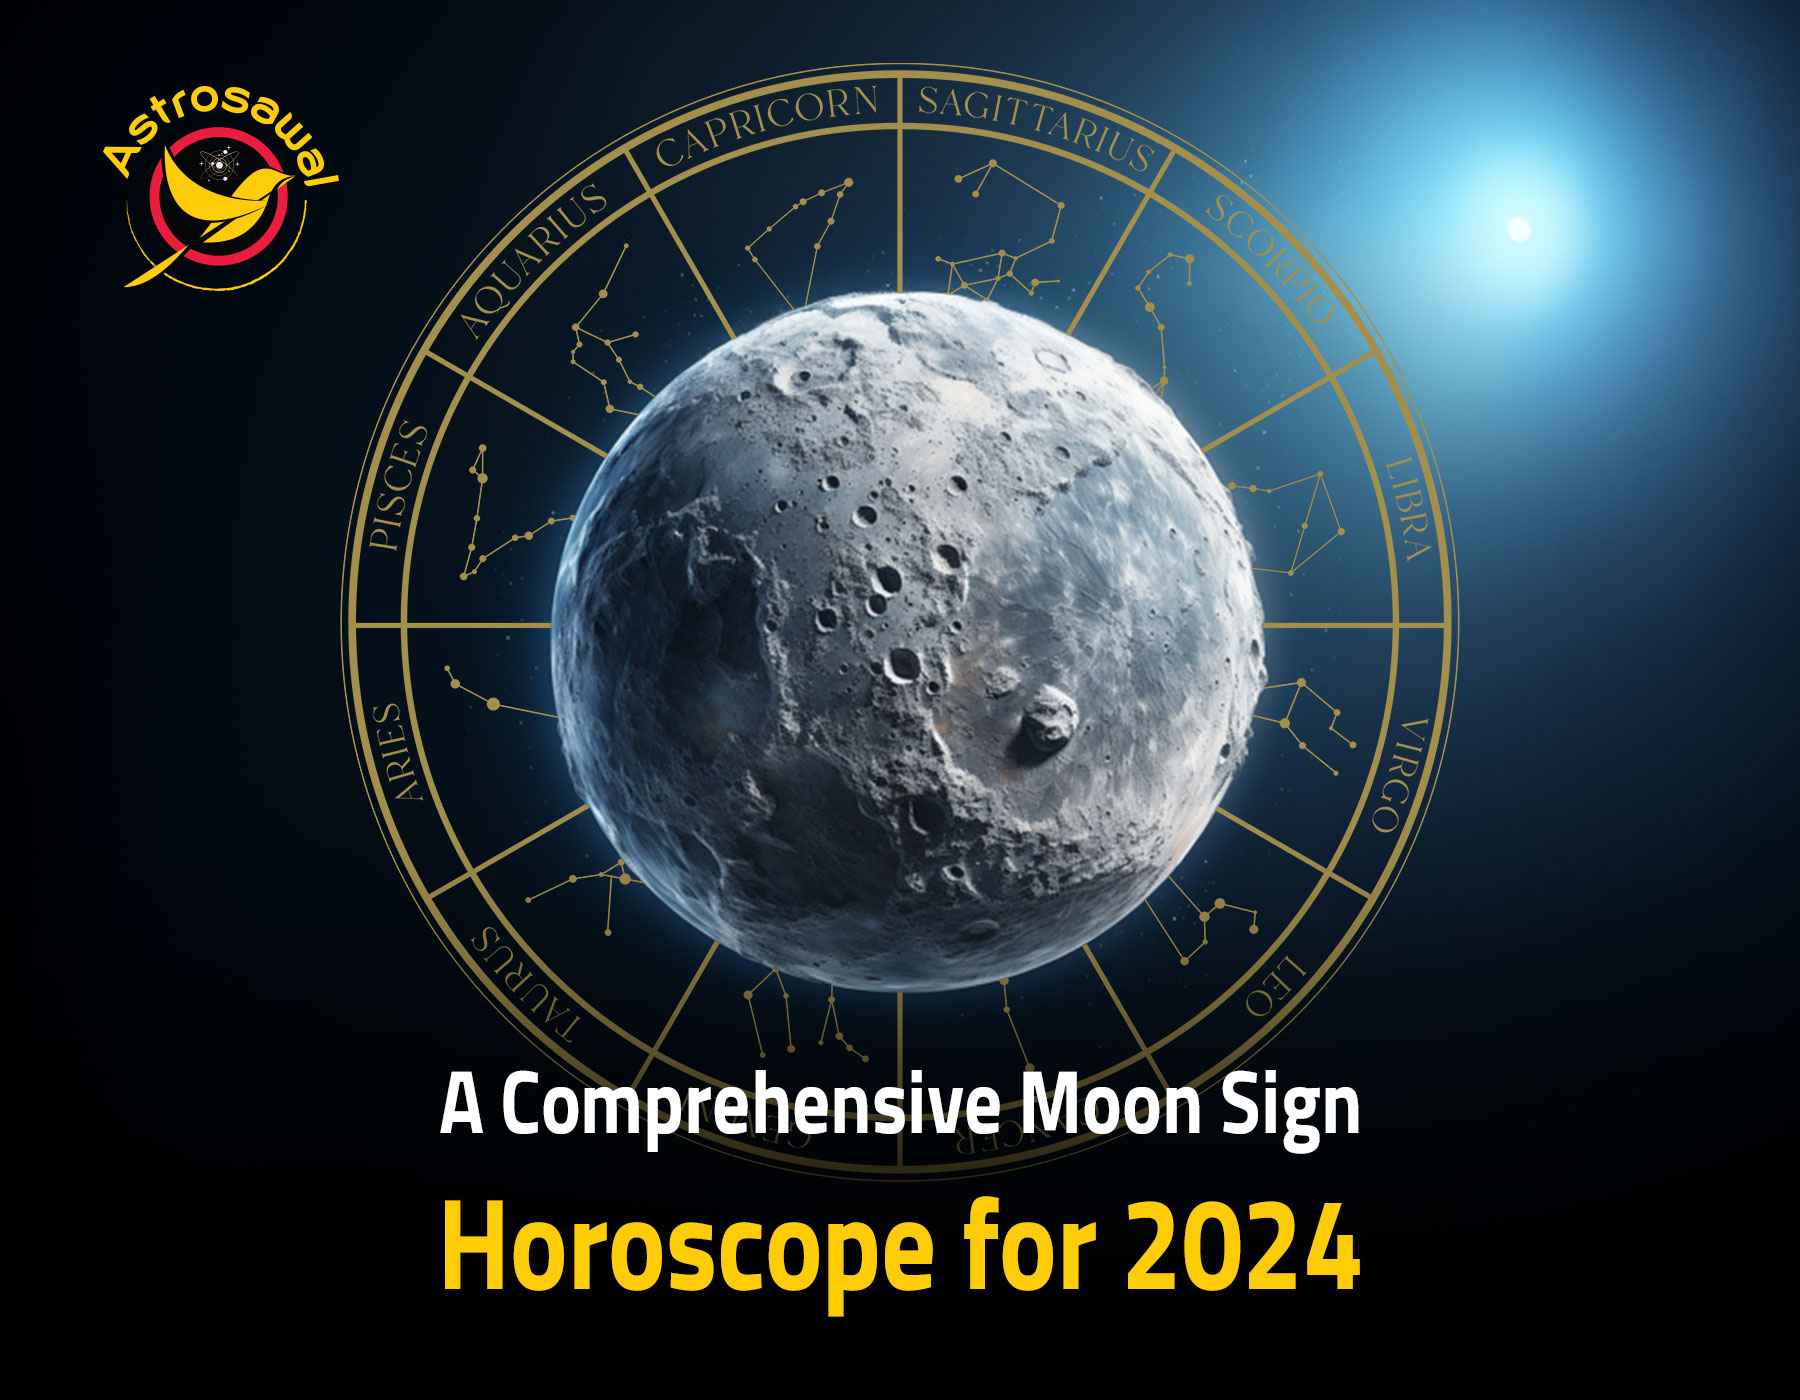 A Comprehensive Moon Sign Horoscope for 2024